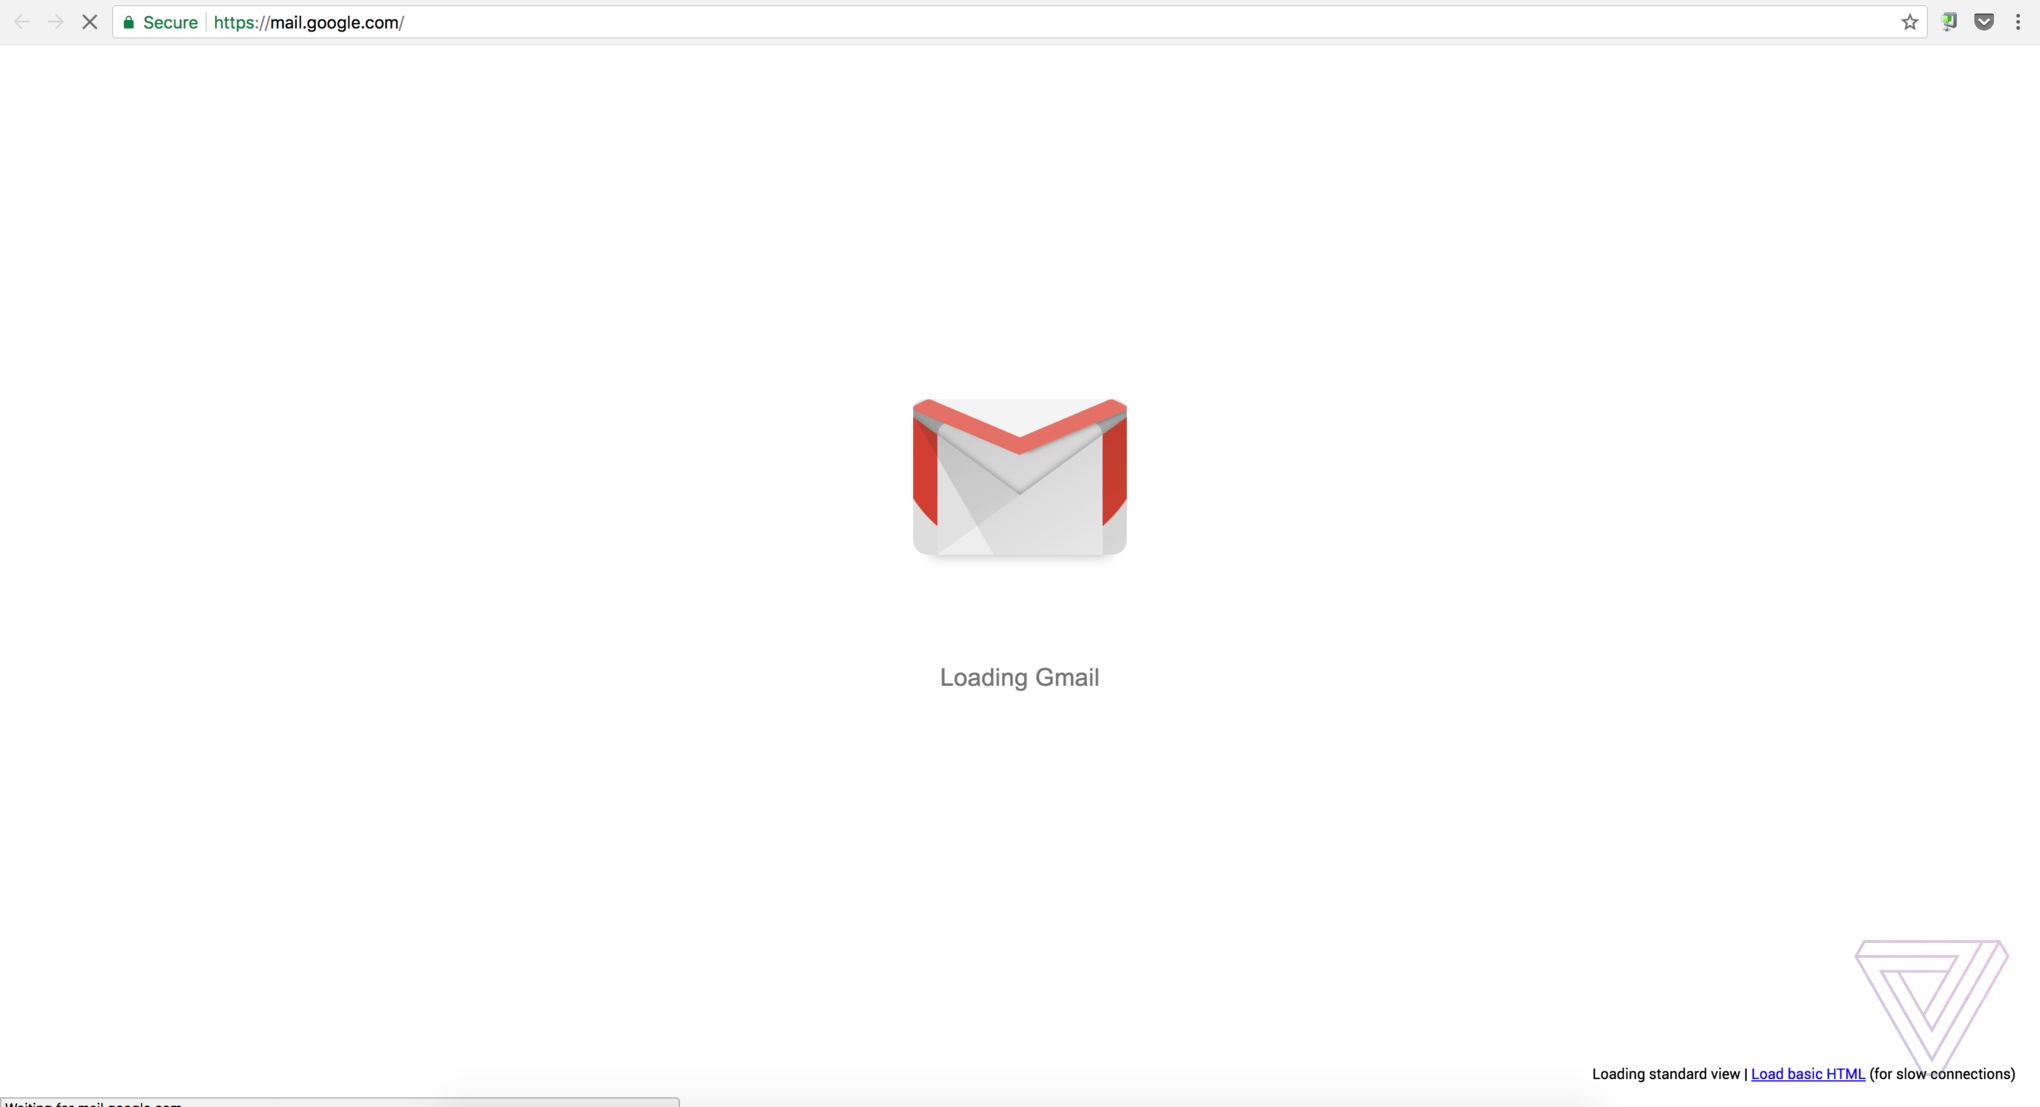 Black and White Mail Logo - This is the new Gmail design - The Verge